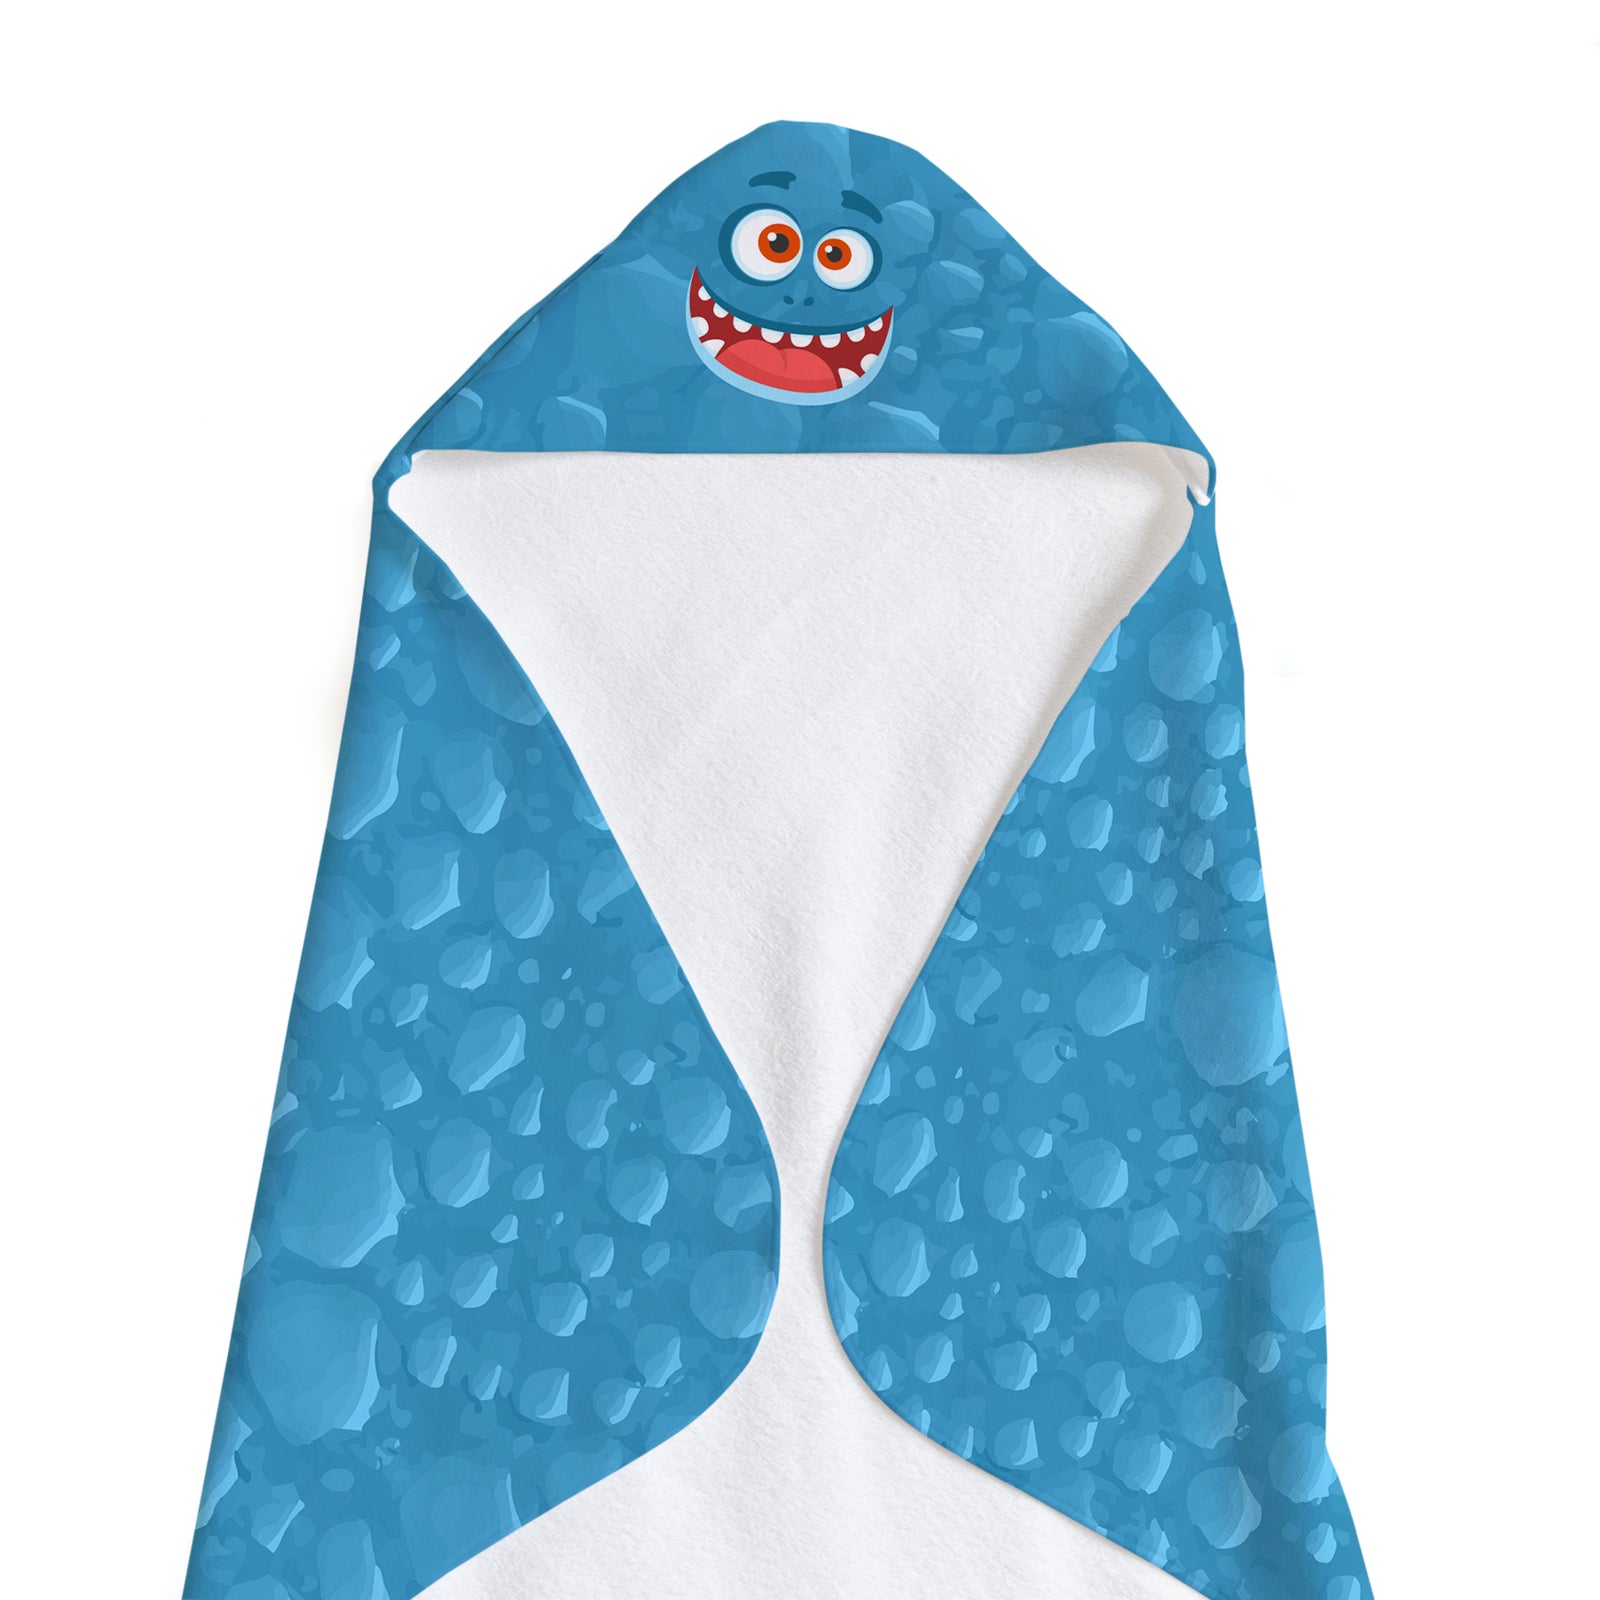 Buy this Blue Monster Soft and Absorbent Hooded Baby Towel